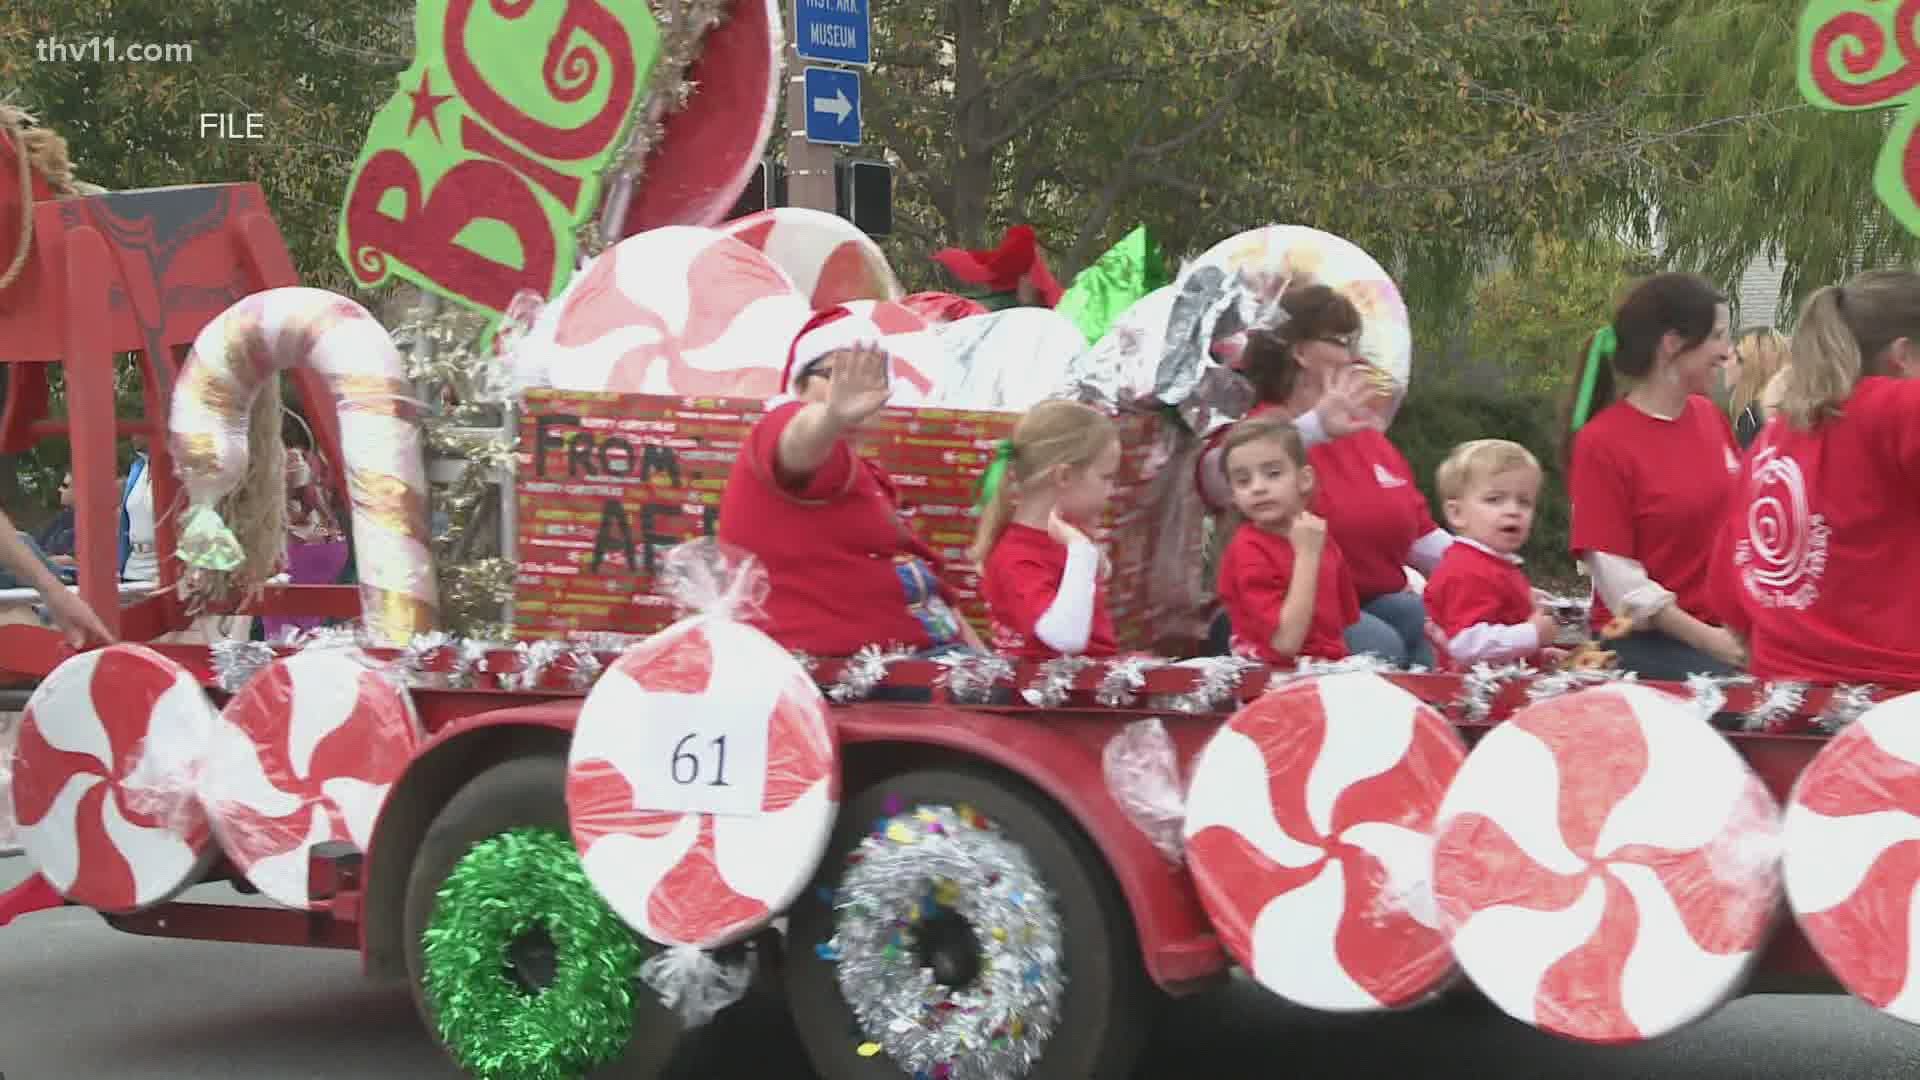 One of Little Rock's most iconic holiday events has been canceled due to COVID-19 concerns.